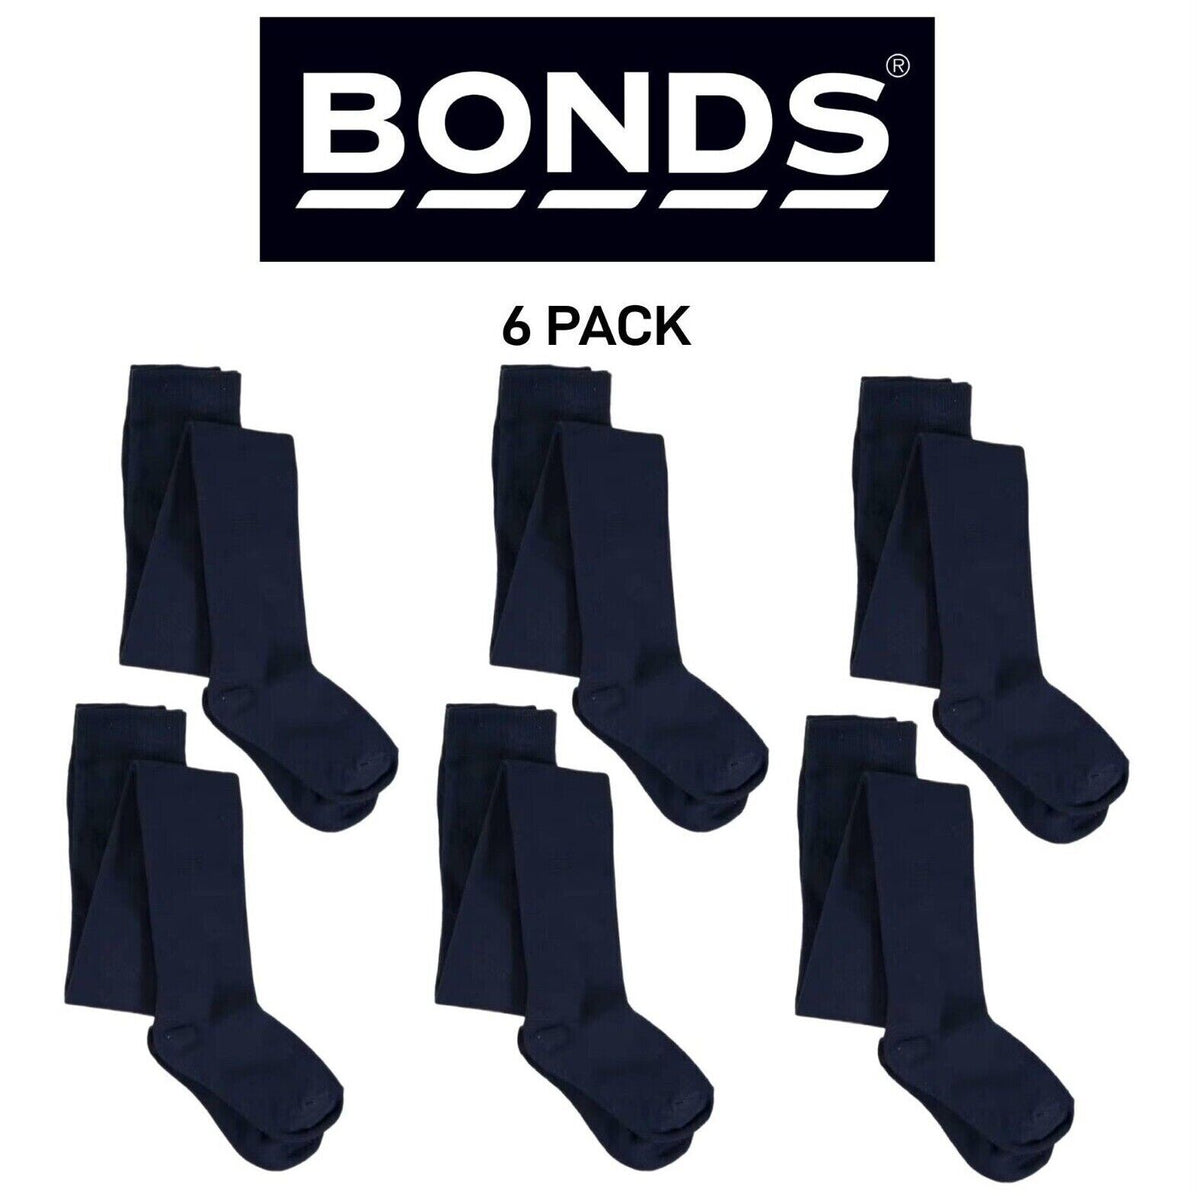 Bonds Kids School Tights Lycra Soft Waistband for Comfort Durable 6 Pack R6312N